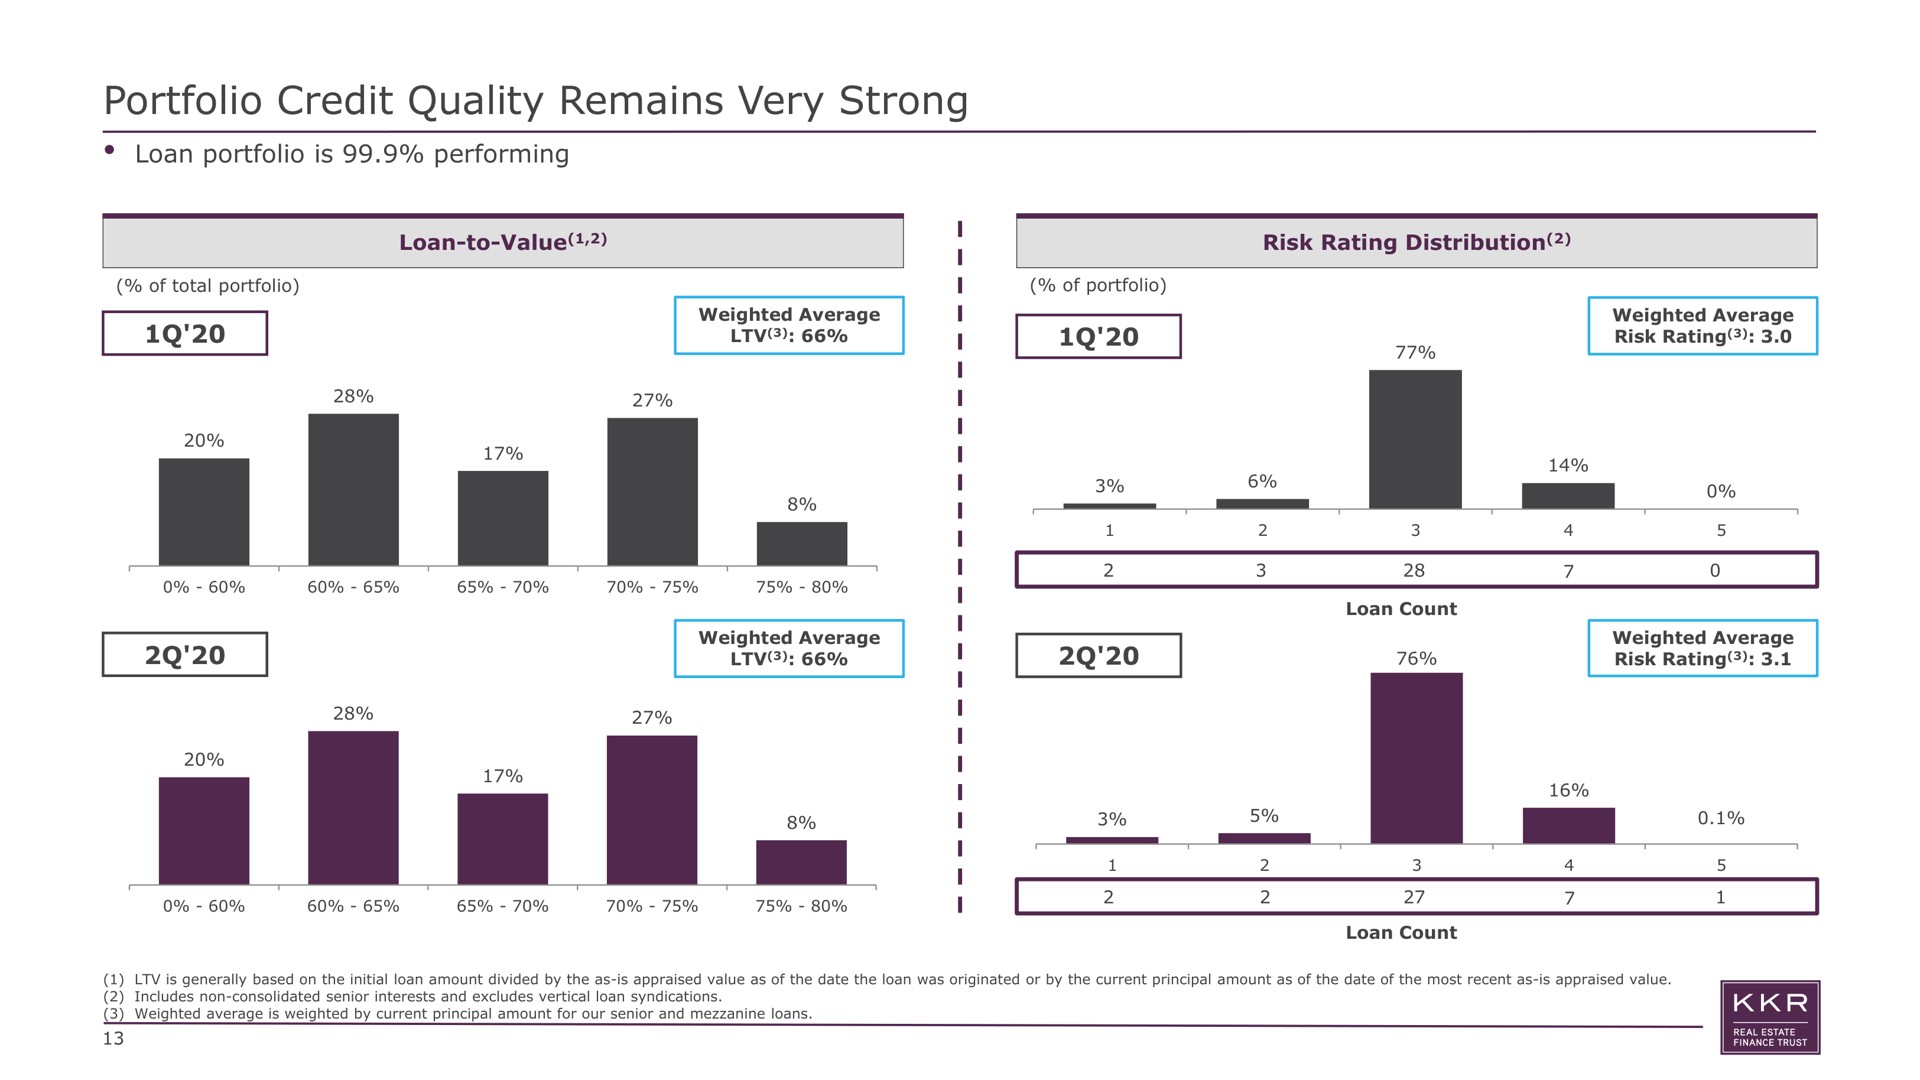 portfolio credit quality remains very strong loan is performing loan to value i risk rating distribution | KKR Real Estate Finance Trust